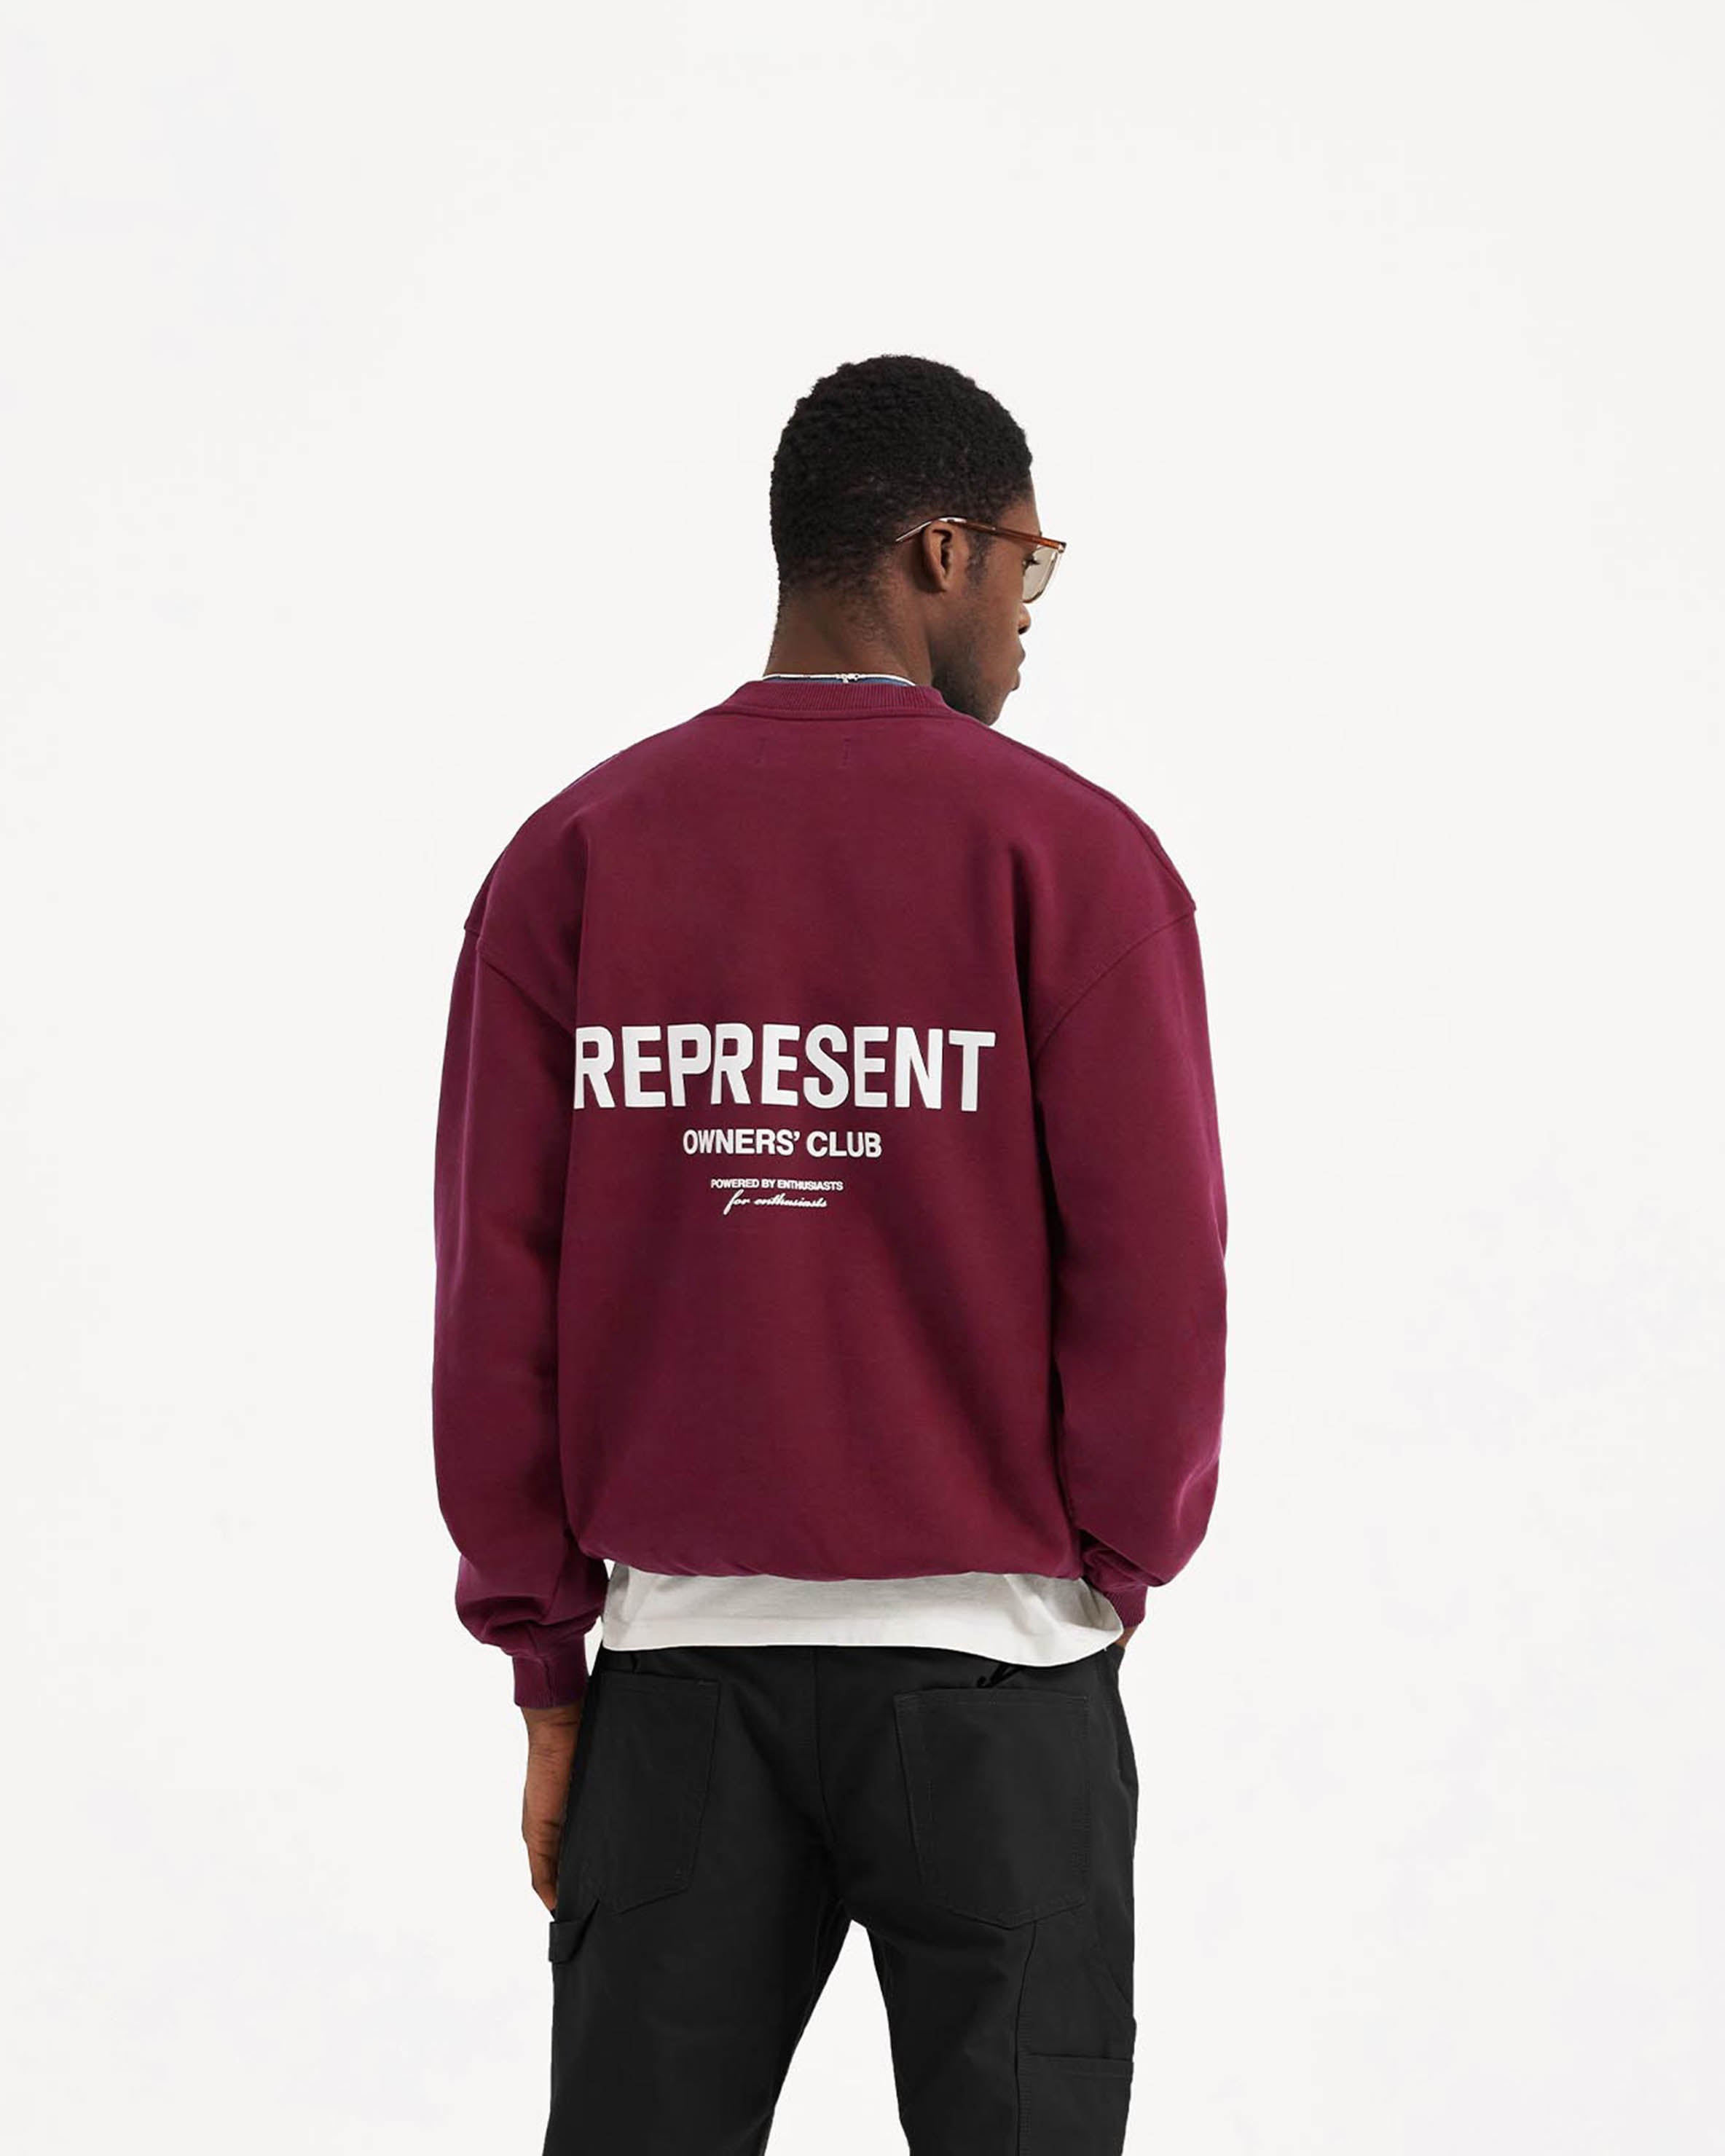 Represent Owners Club Sweater - Maroon